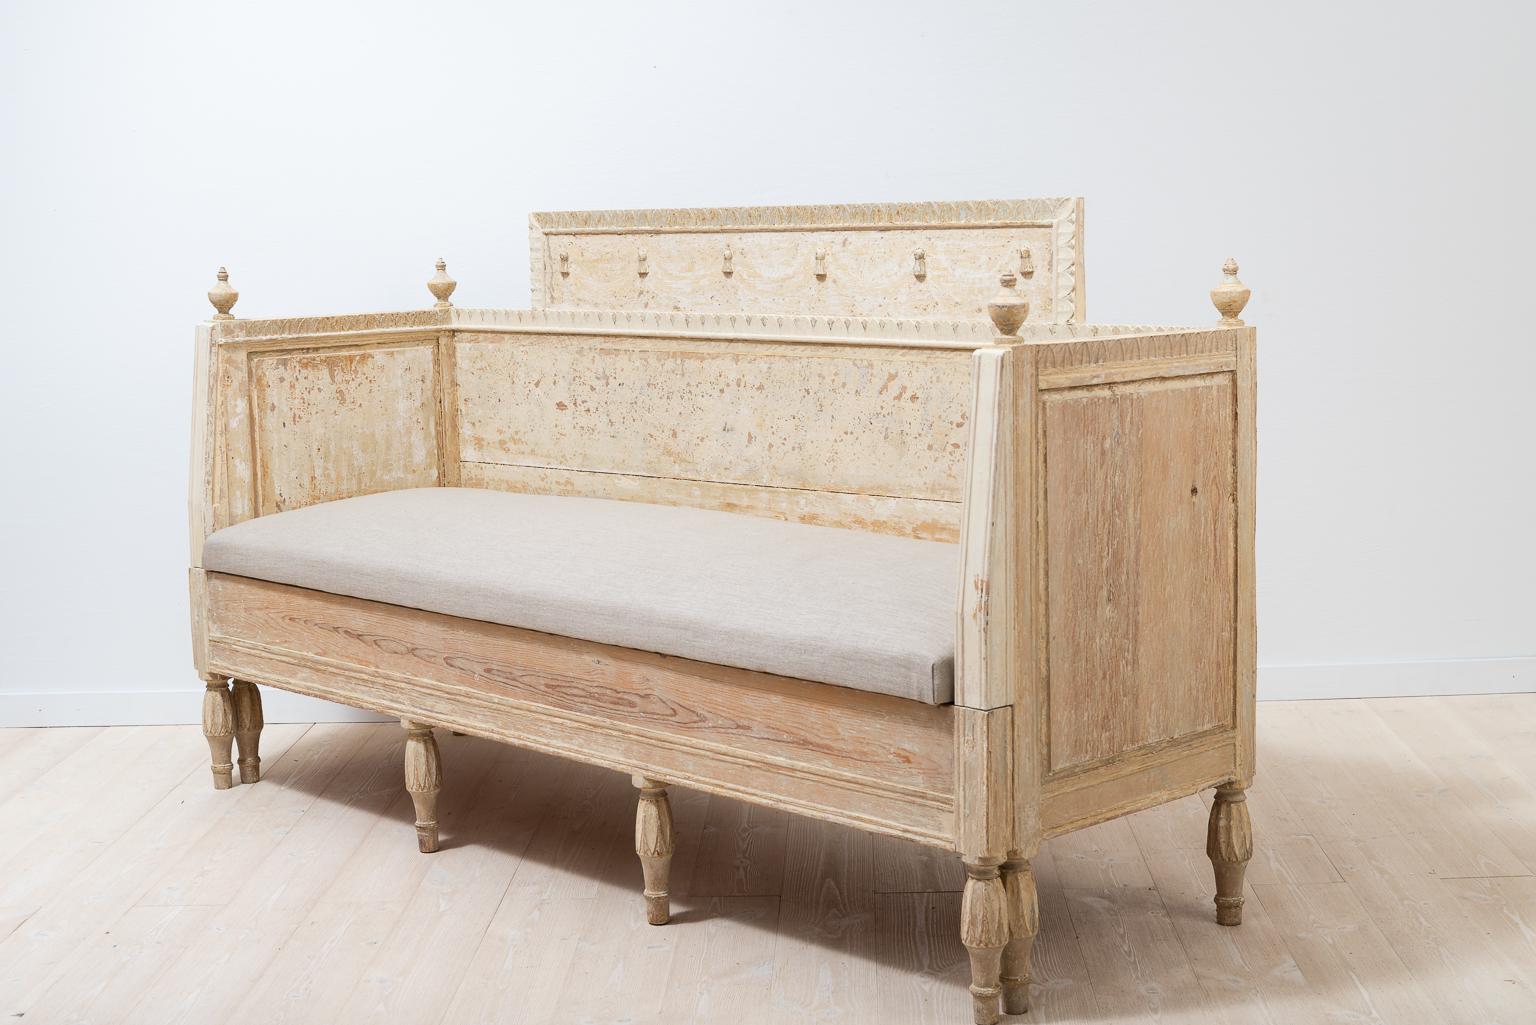 Gustavian sofa from northern Sweden that’s been dry scraped to original paint. Renovated seat with upholstery in linen fabric, Västerbotten, circa 1790-1800

 The Gustavian style has received its name from the Swedish king Gustav III that ruled